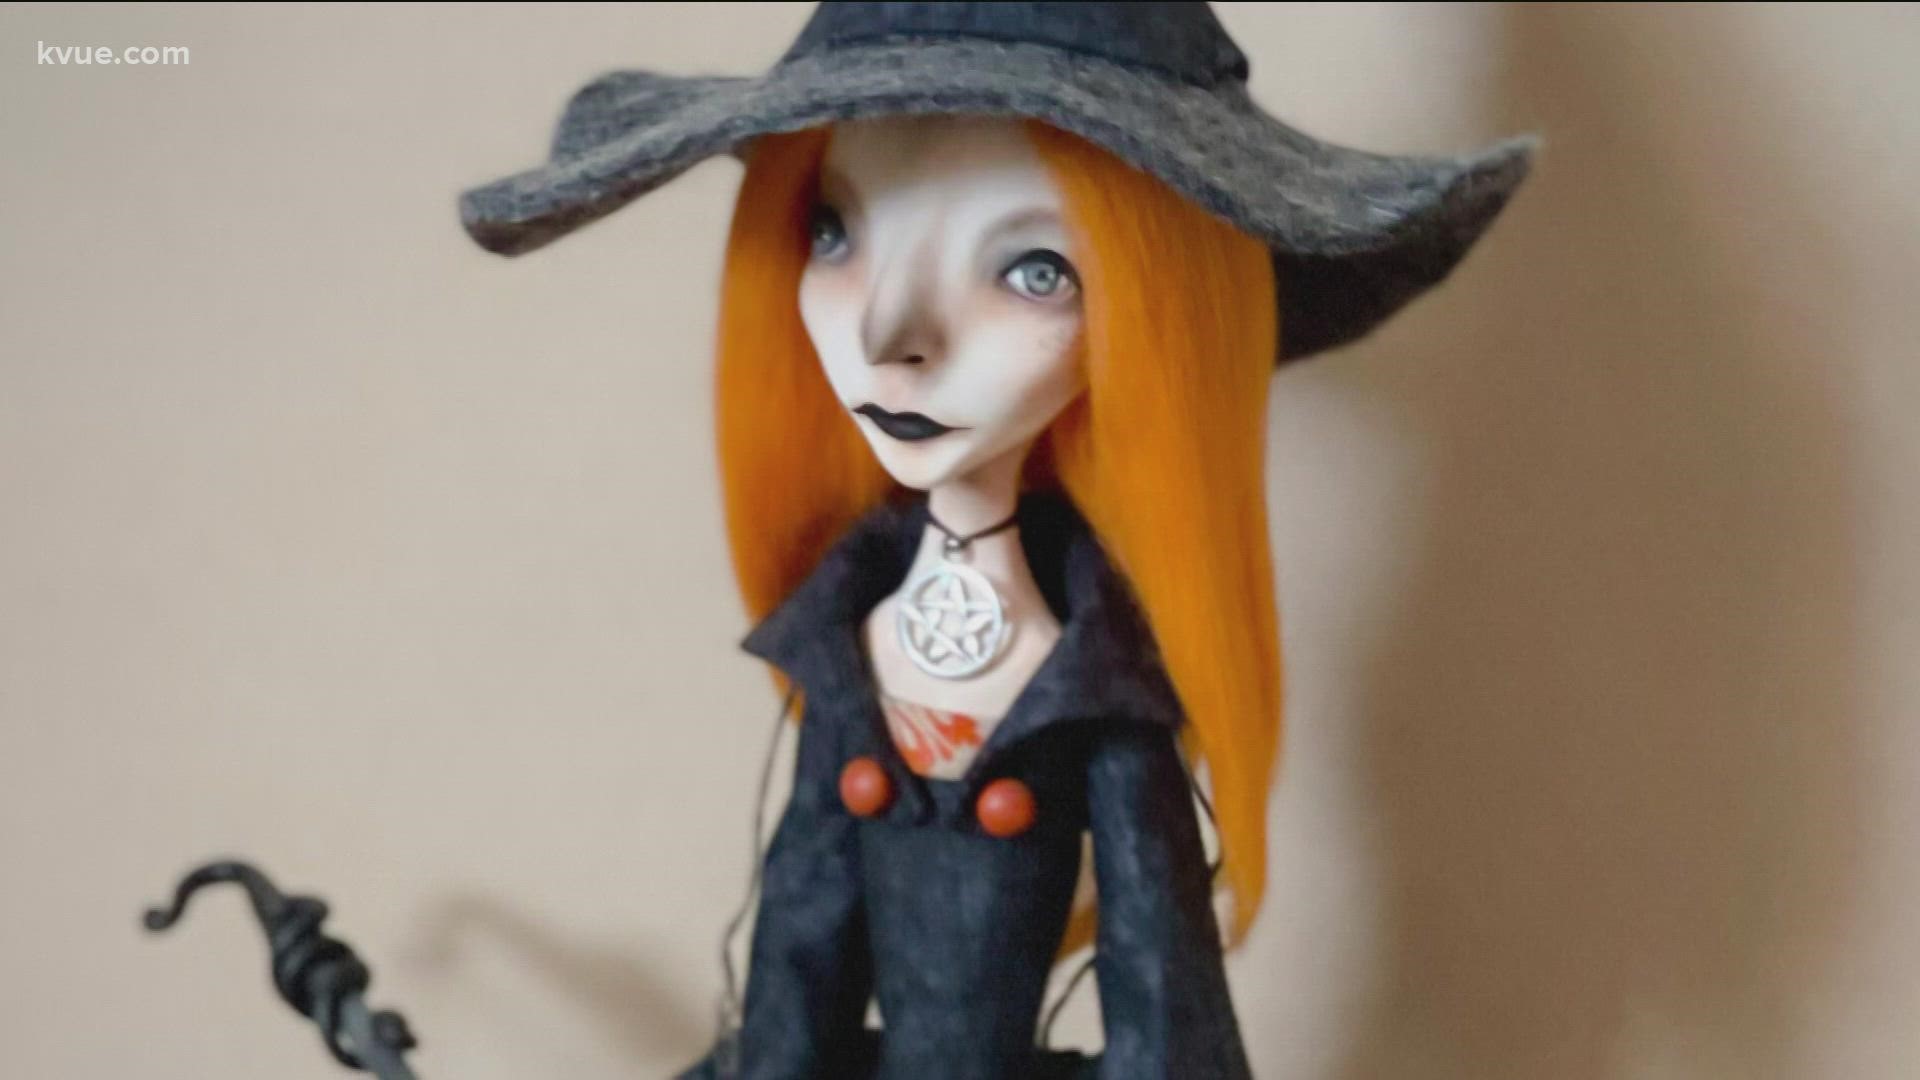 Austin artist Myriam Powell has been creating needle-felted dolls for about a decade. She said it takes days sometimes weeks to create a doll.